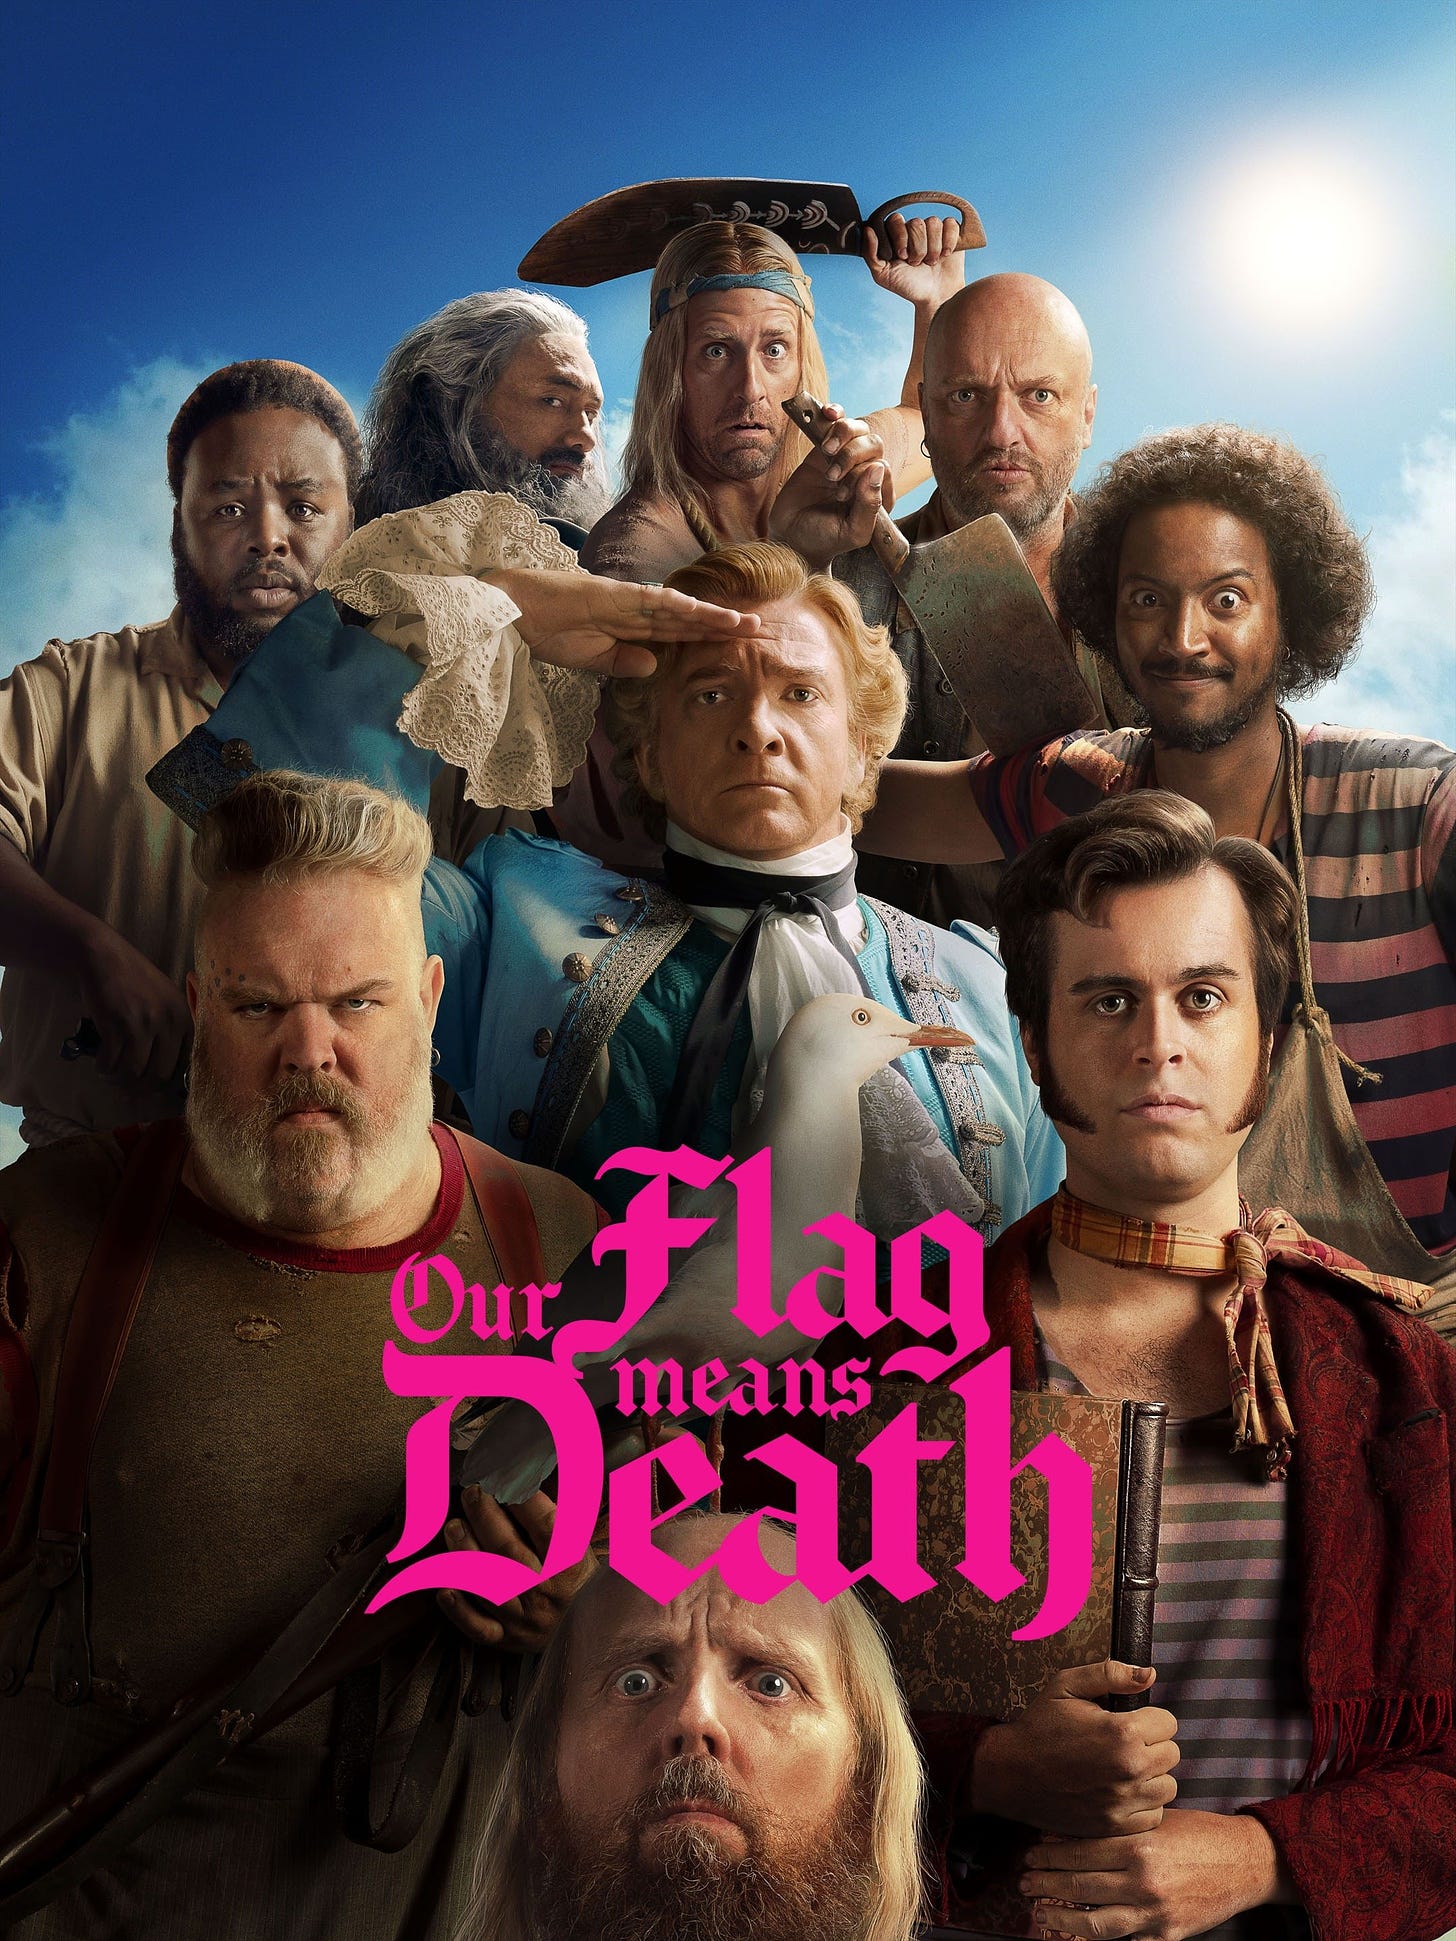 The poster for 'Our Flag Means Death'